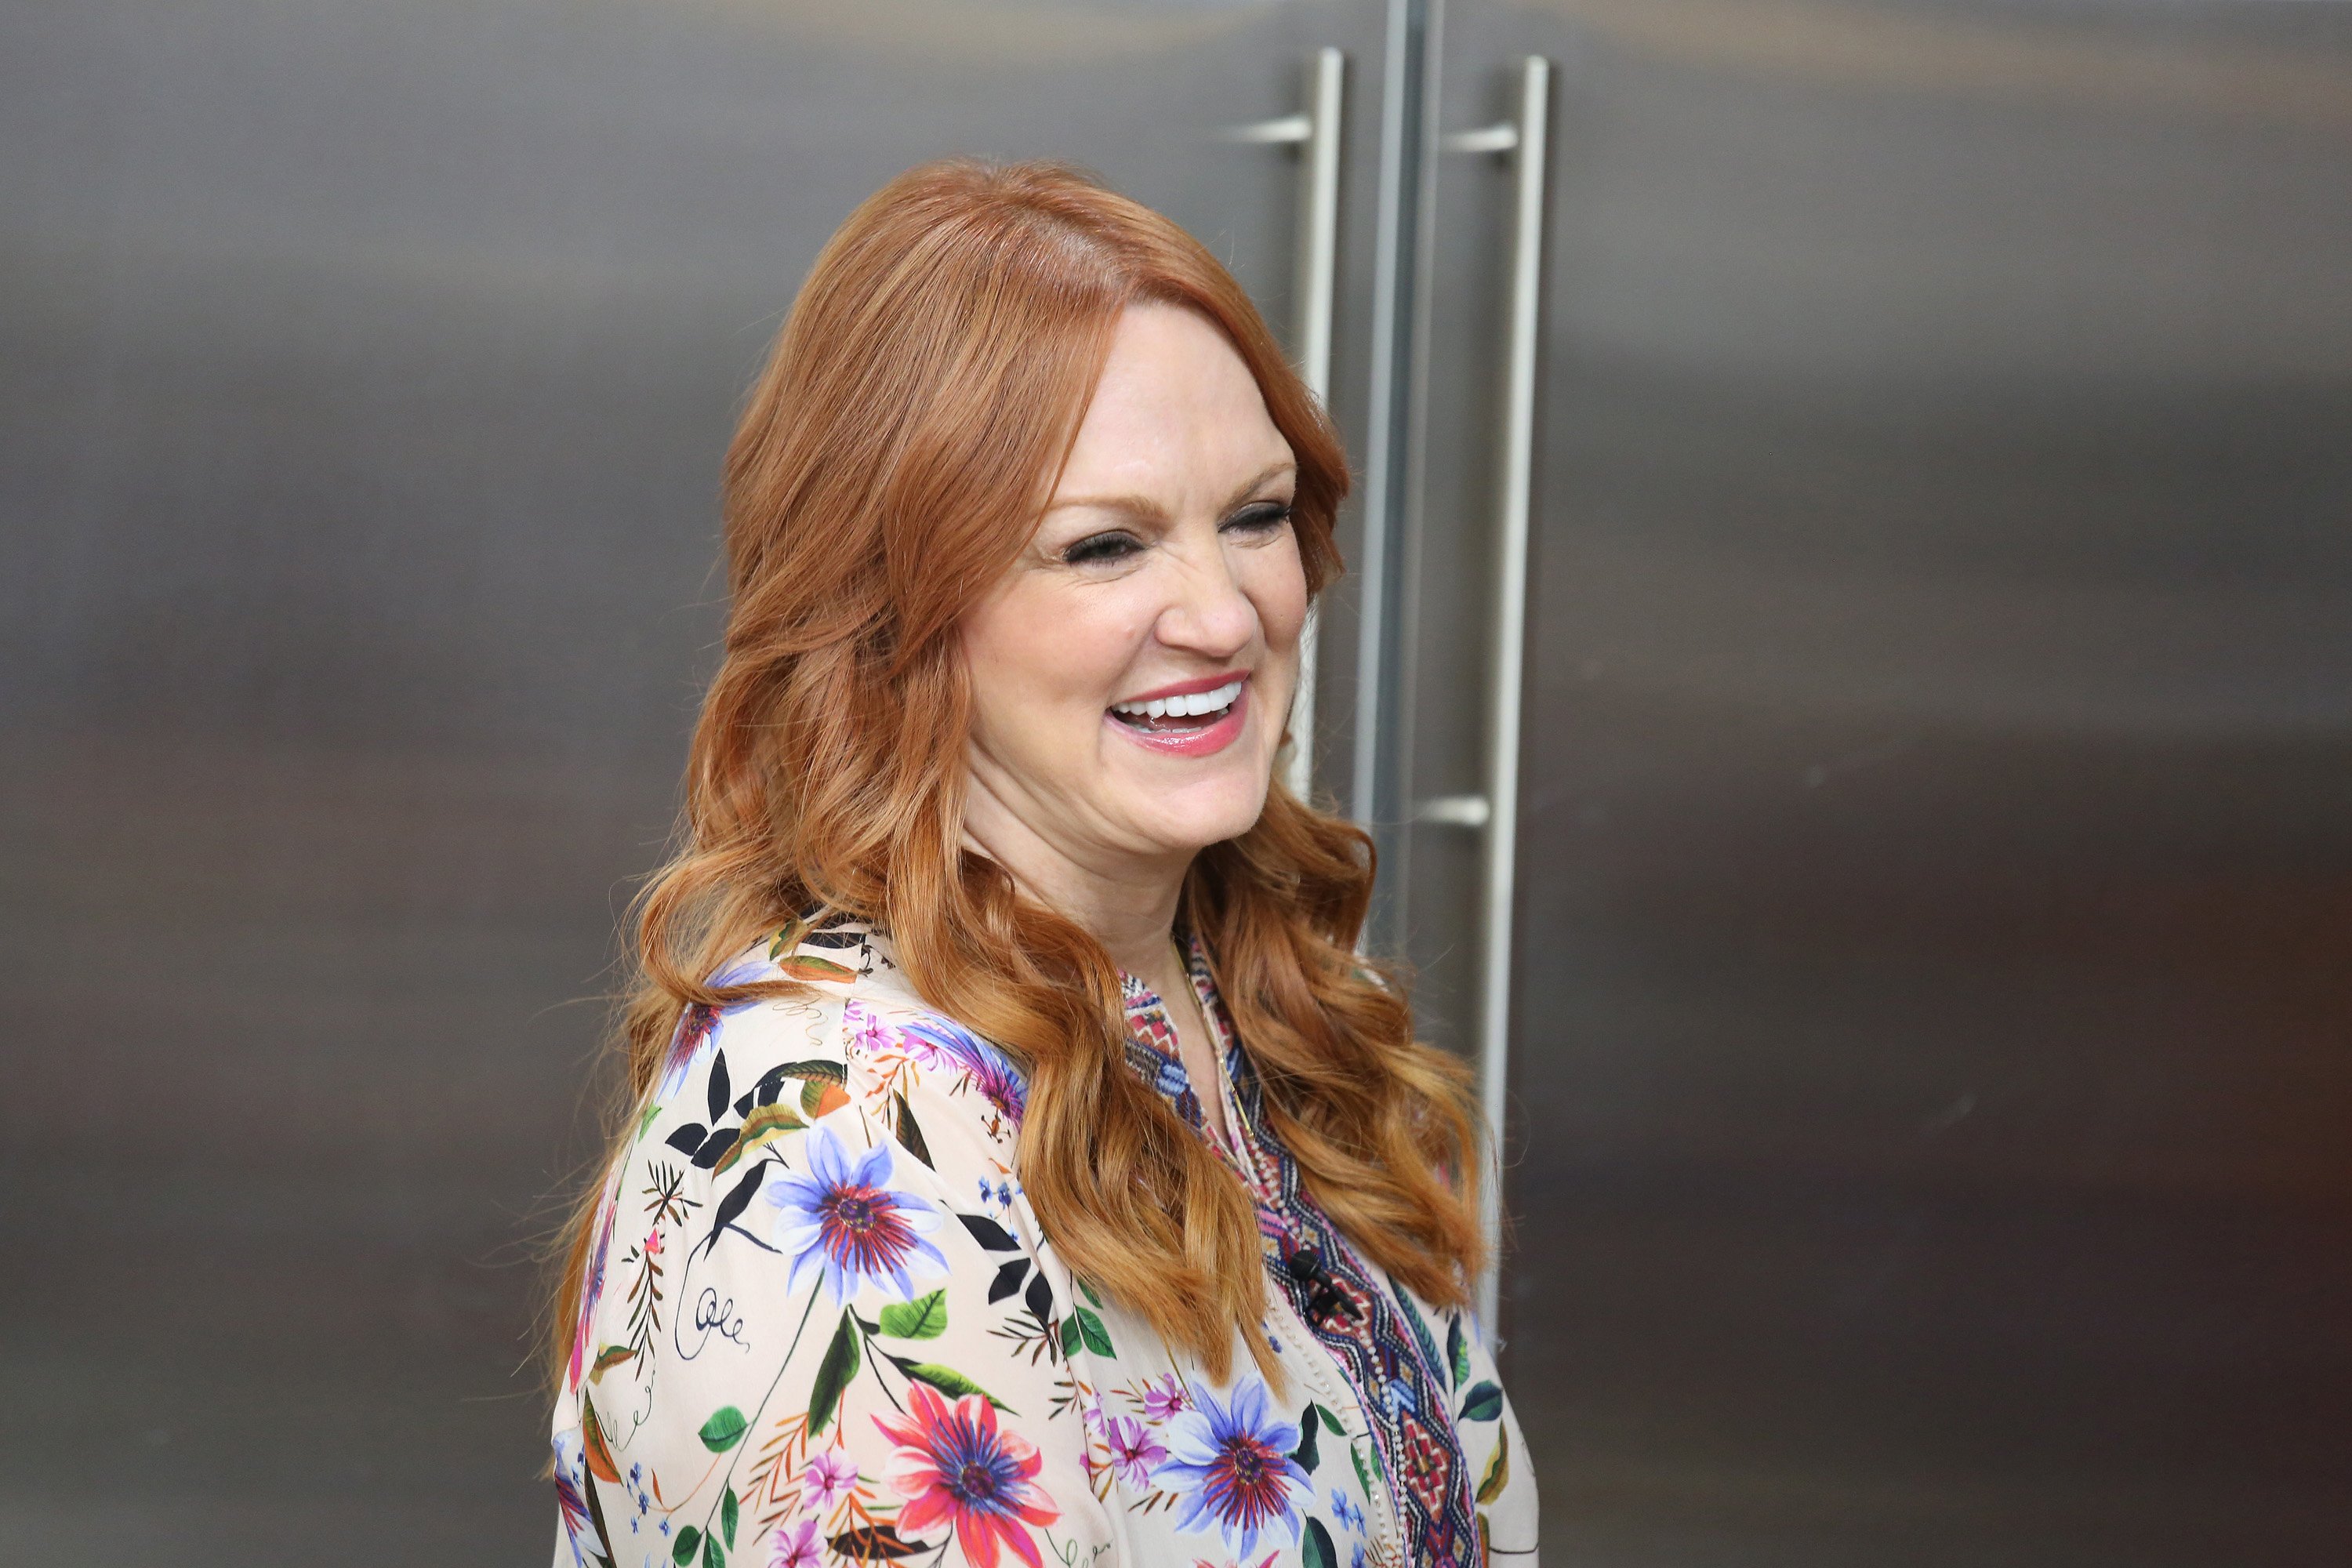 Ree Drummond in a floral shirt, smiling on the Today show